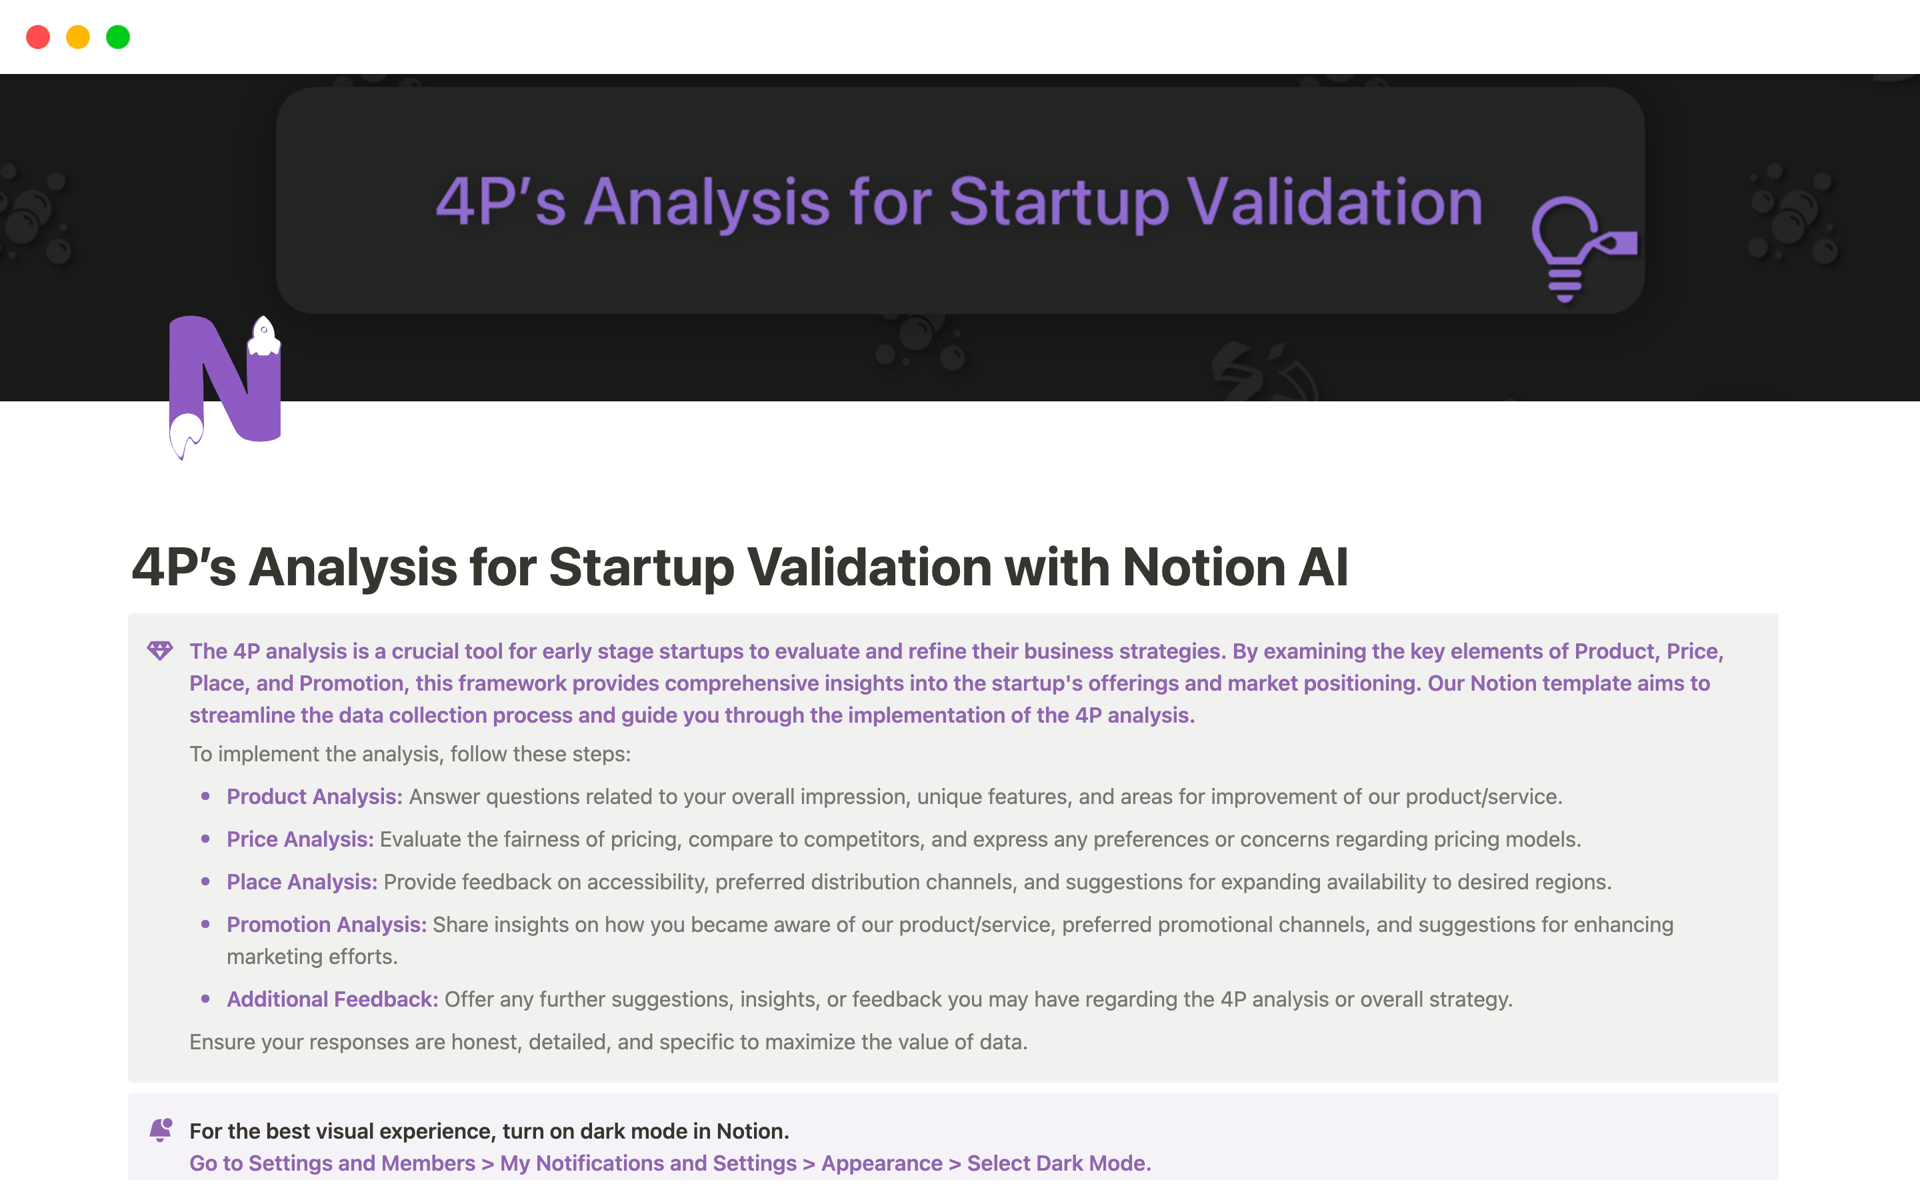 4P's Analysis for Startup Validation with Notion AIのテンプレートのプレビュー